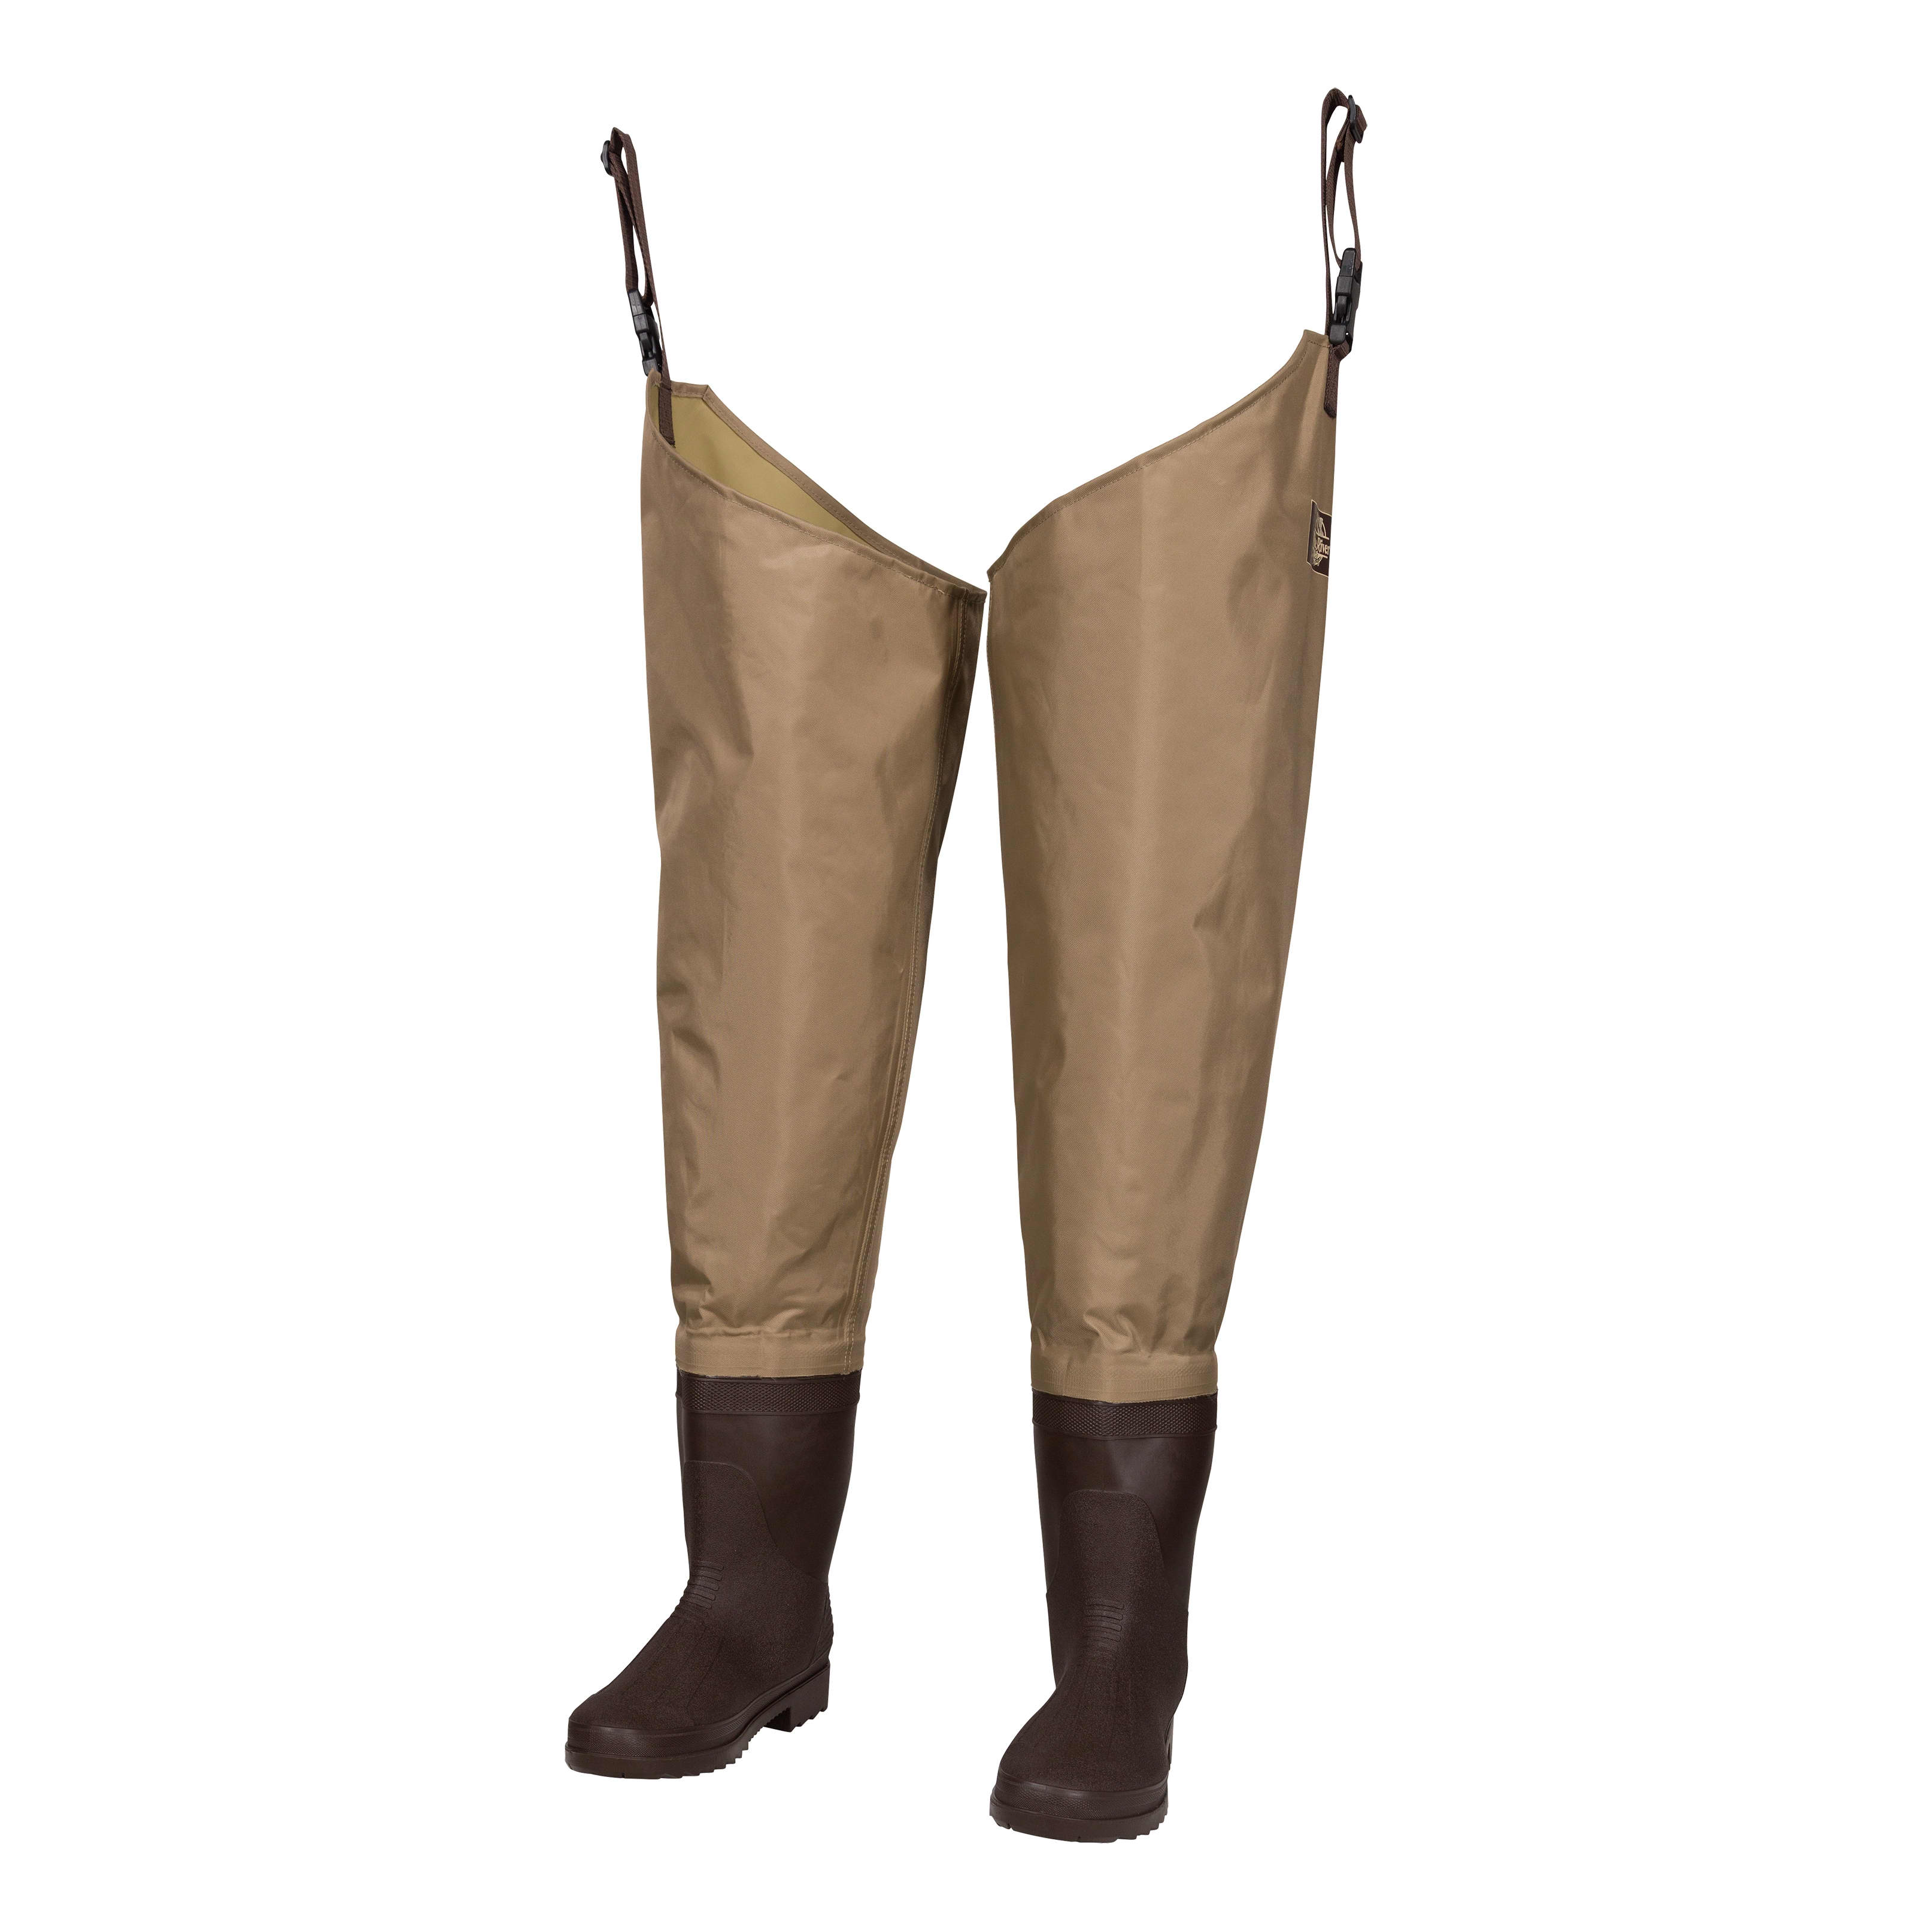 White River Women’s Three Forks Lug-Sole Waders - Cabelas - White